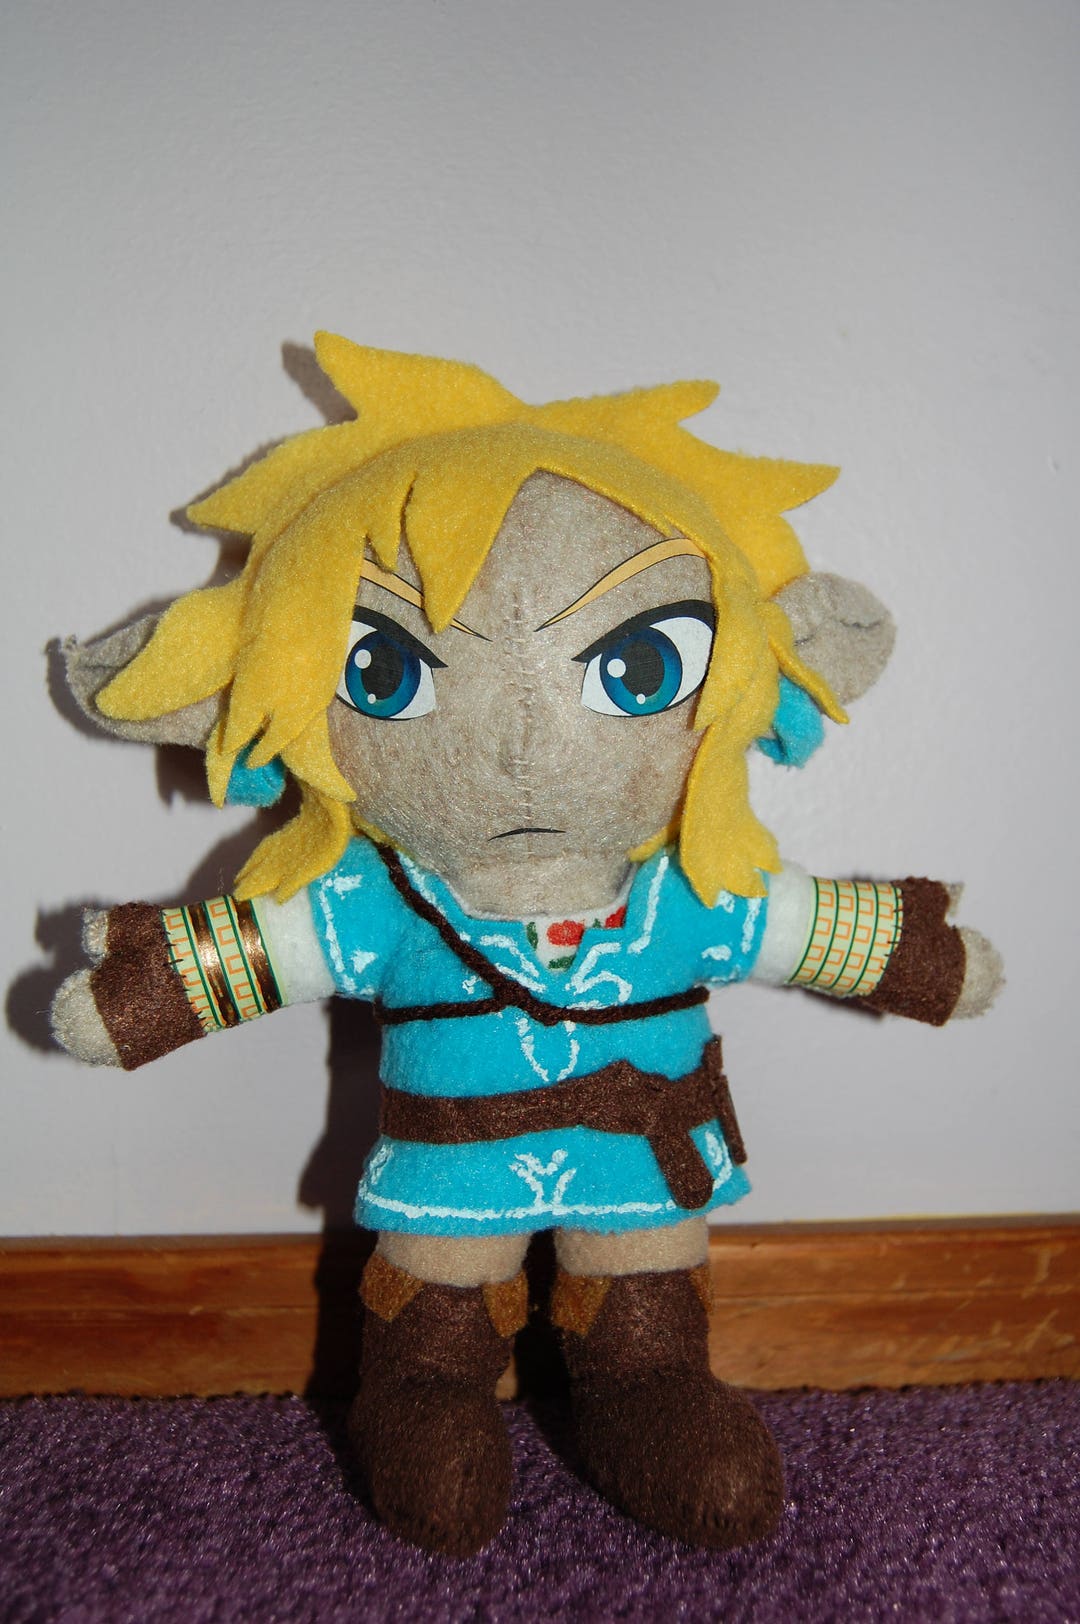 Just wanted to show you guys my adorable link and Zelda plushies. :  r/Breath_of_the_Wild